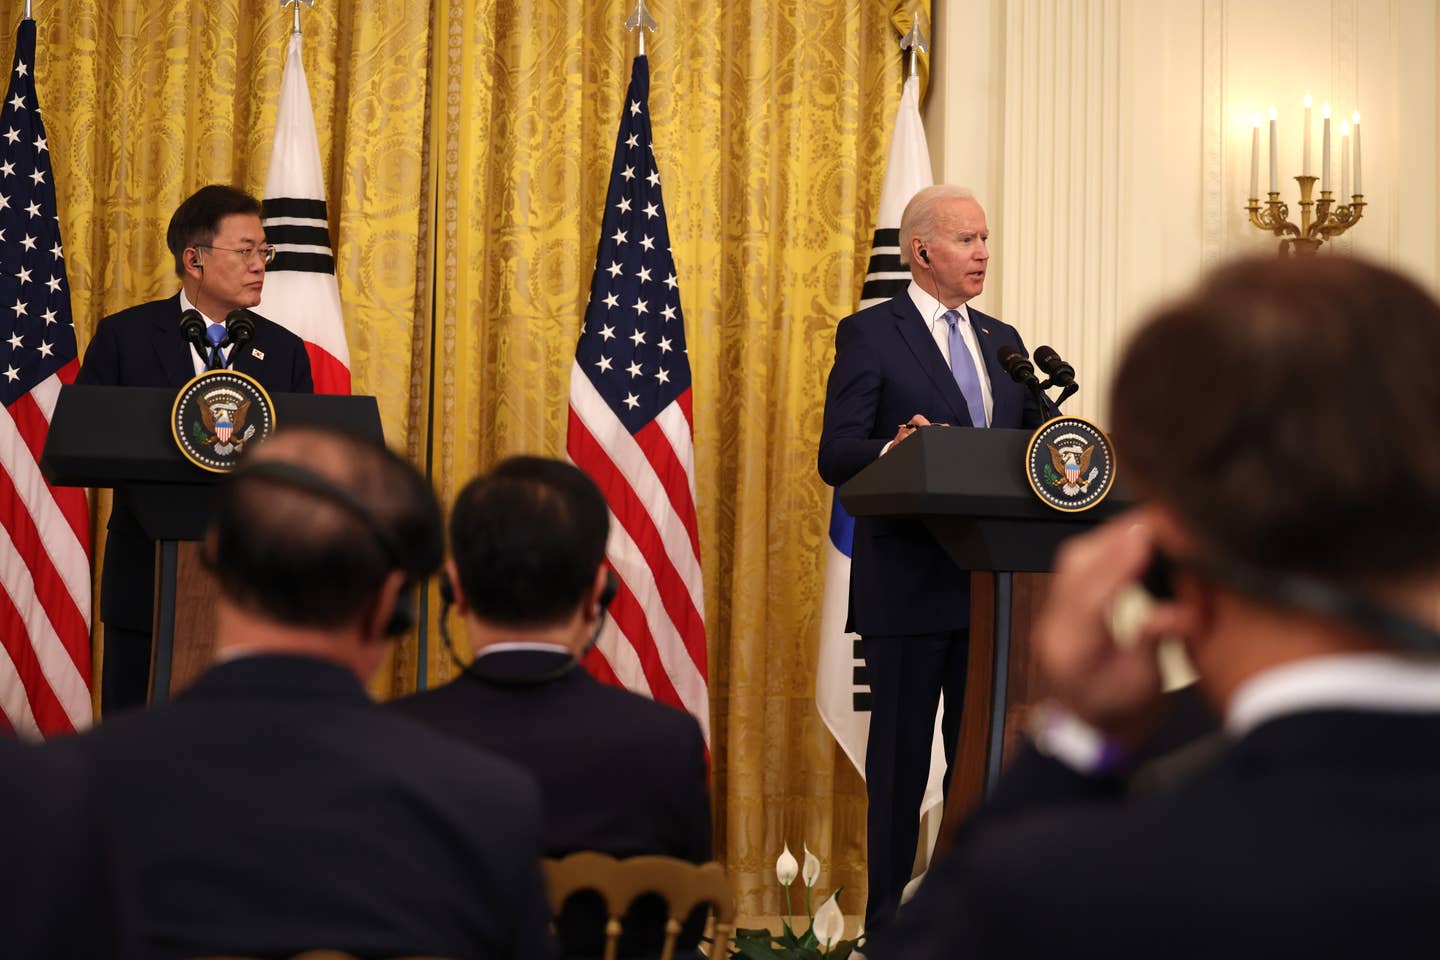 Presidents Joe Biden and Moon Jae-in participate in a joint press conference at the White House on May 21, 2021. Moon Jae-in was the second world leader to be hosted by Biden at the White House. <em>Photo by Anna Moneymaker/Getty Images</em>